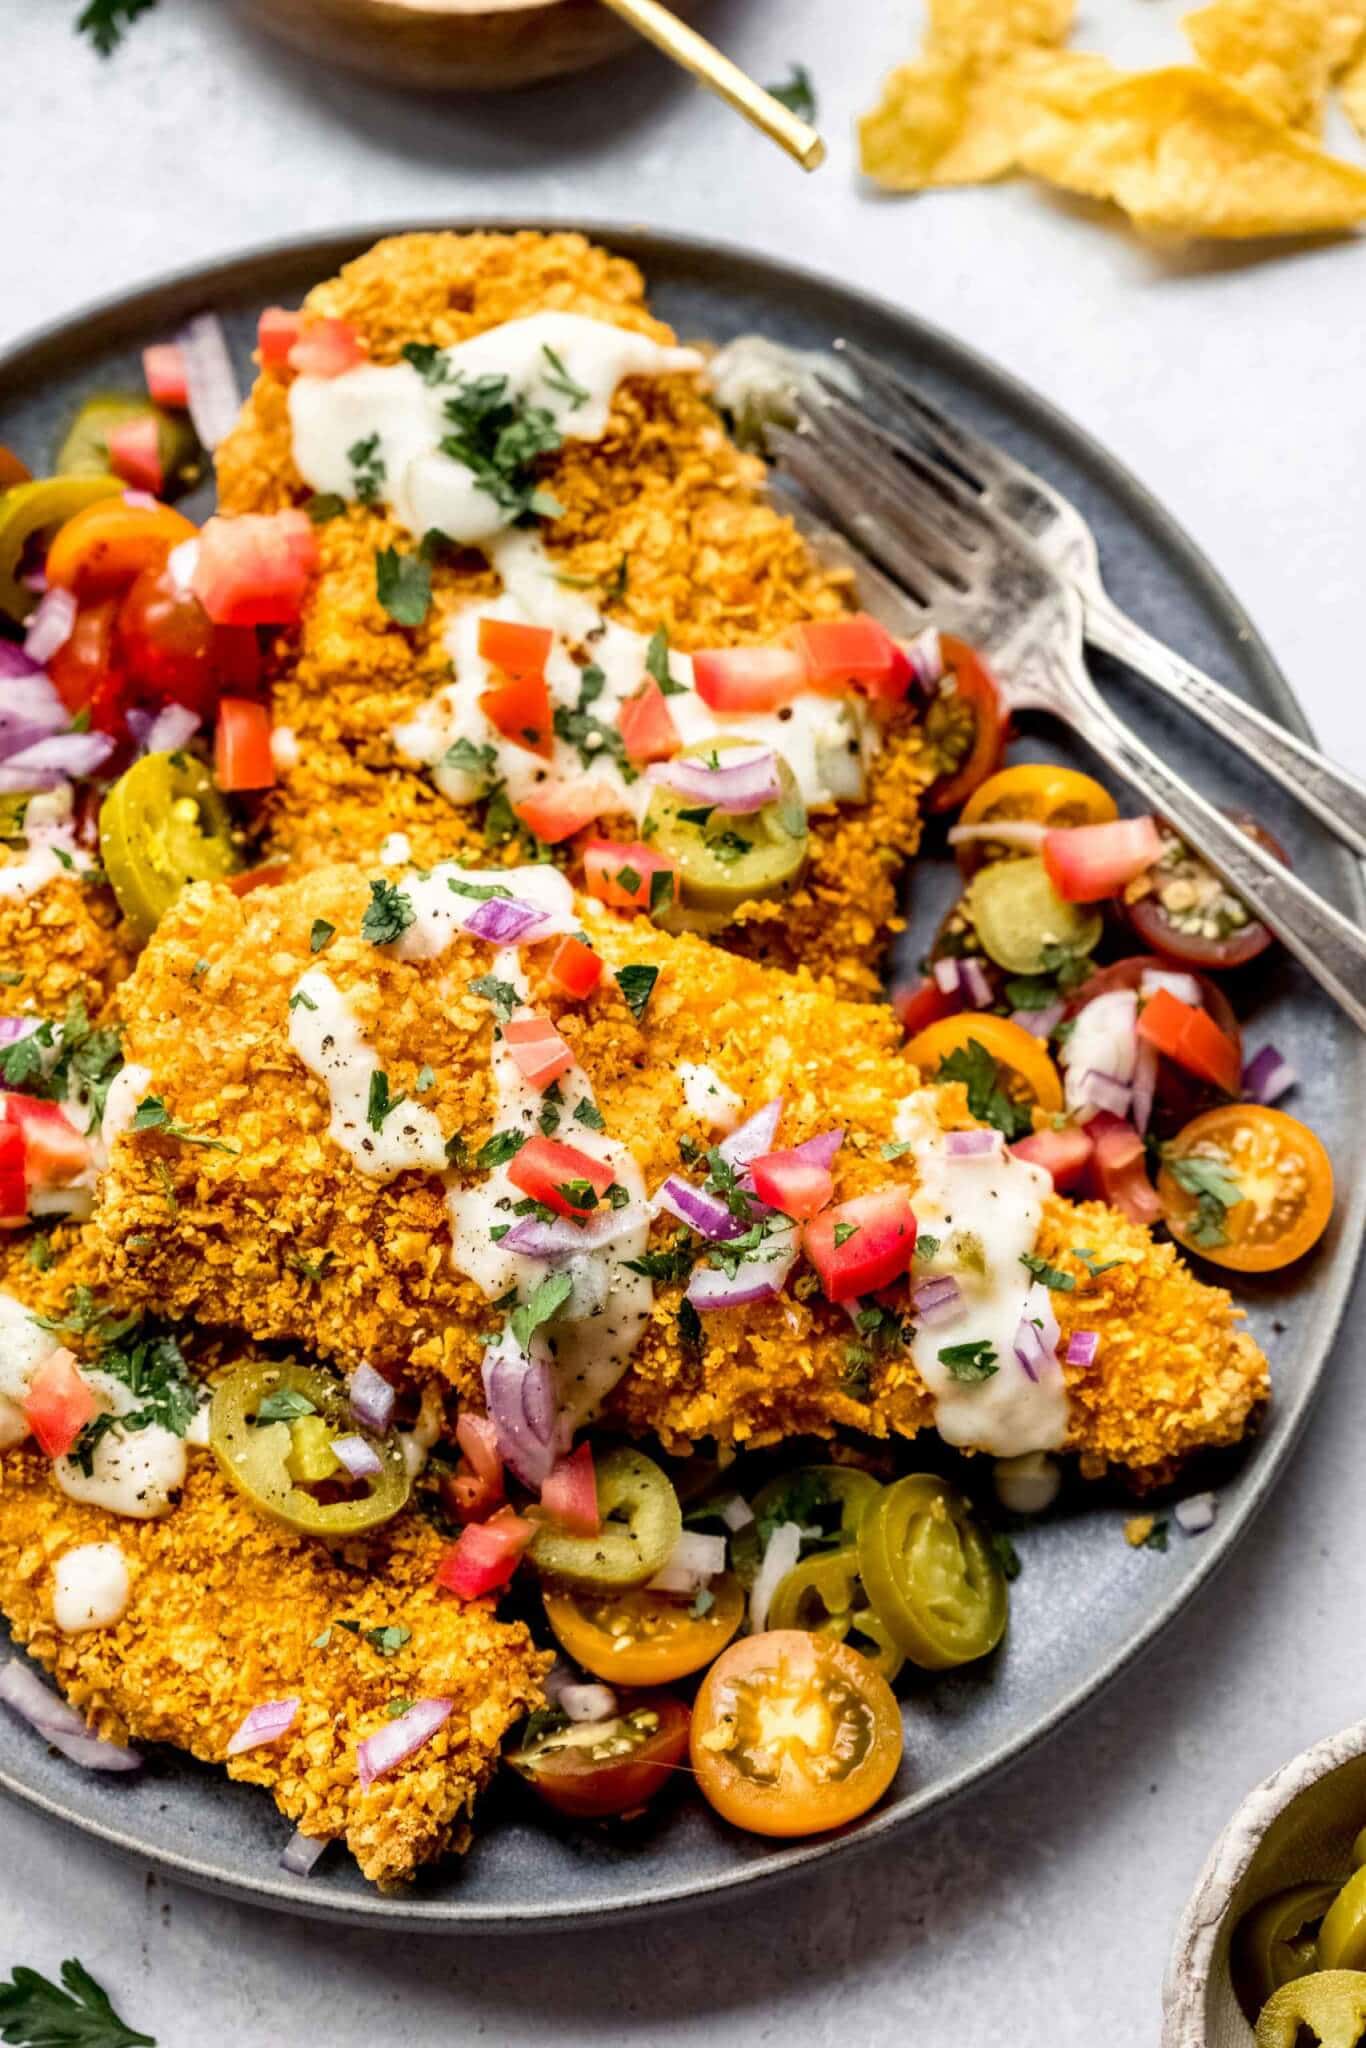 Tortilla chip crusted chicken cutlets arranged on plate topped with queso, tomatoes and red onion.